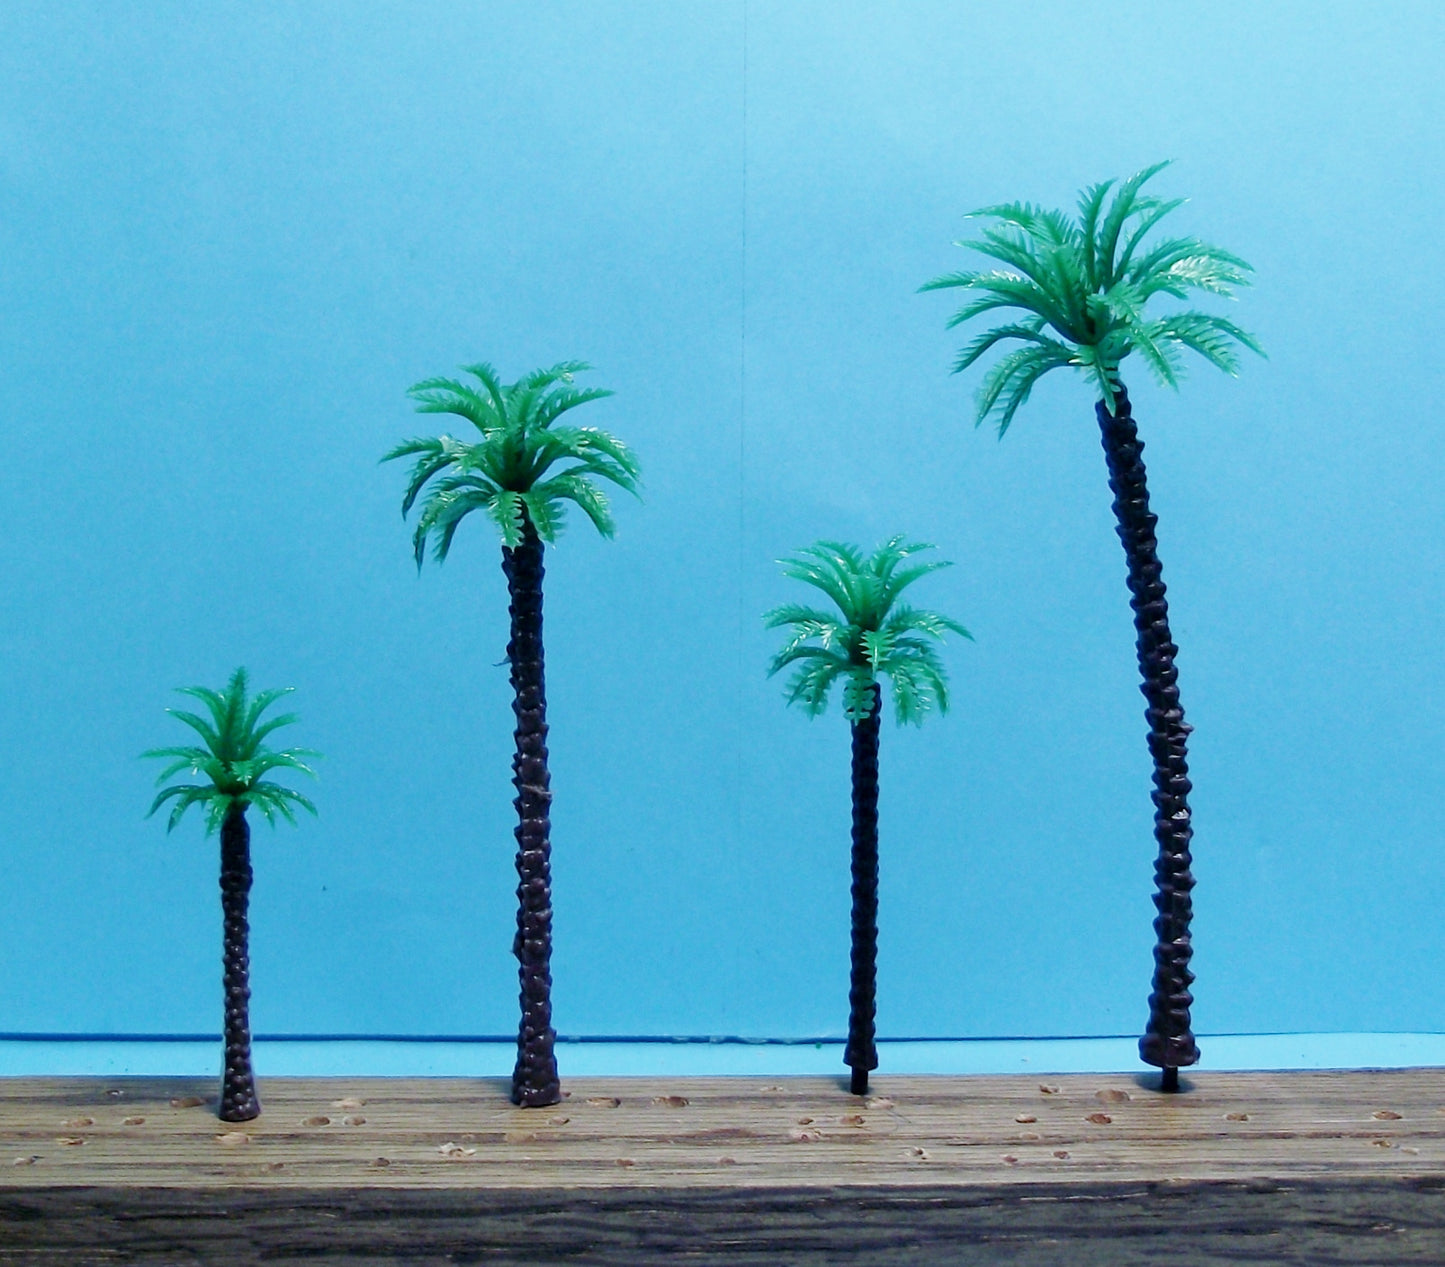 Model Coconut Palm Trees for Multi Scale Use 12 Piece Assortment in 4 Sizes